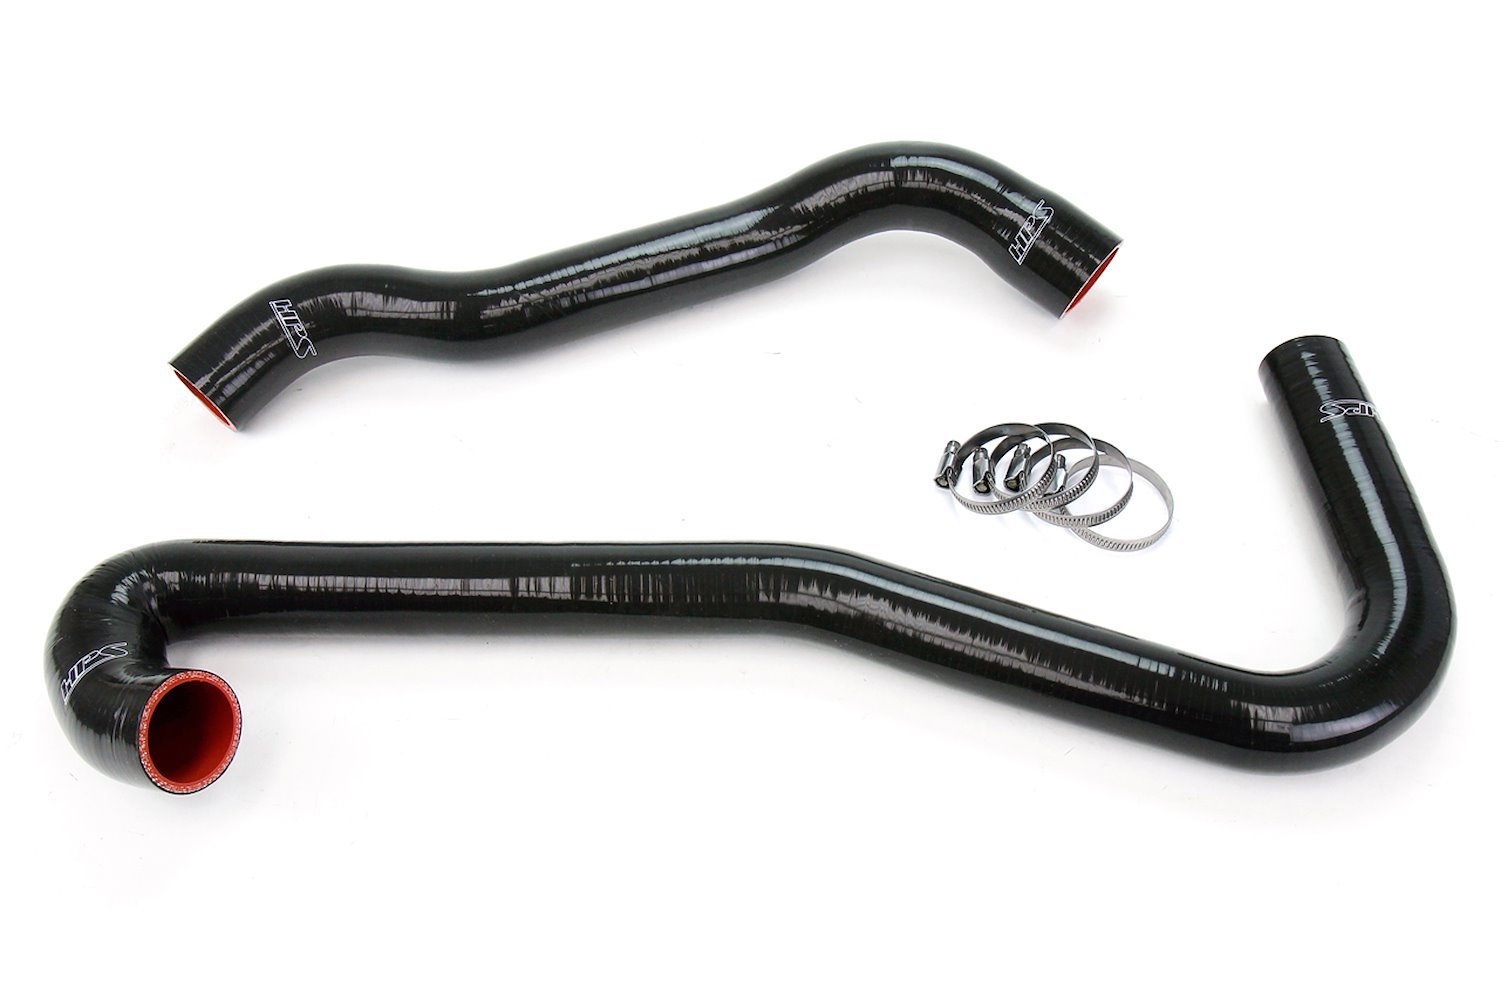 57-1453-BLK Radiator Hose Kit, High-Temp 3-Ply Reinforced Silicone, Replace OEM Rubber Radiator Coolant Hoses